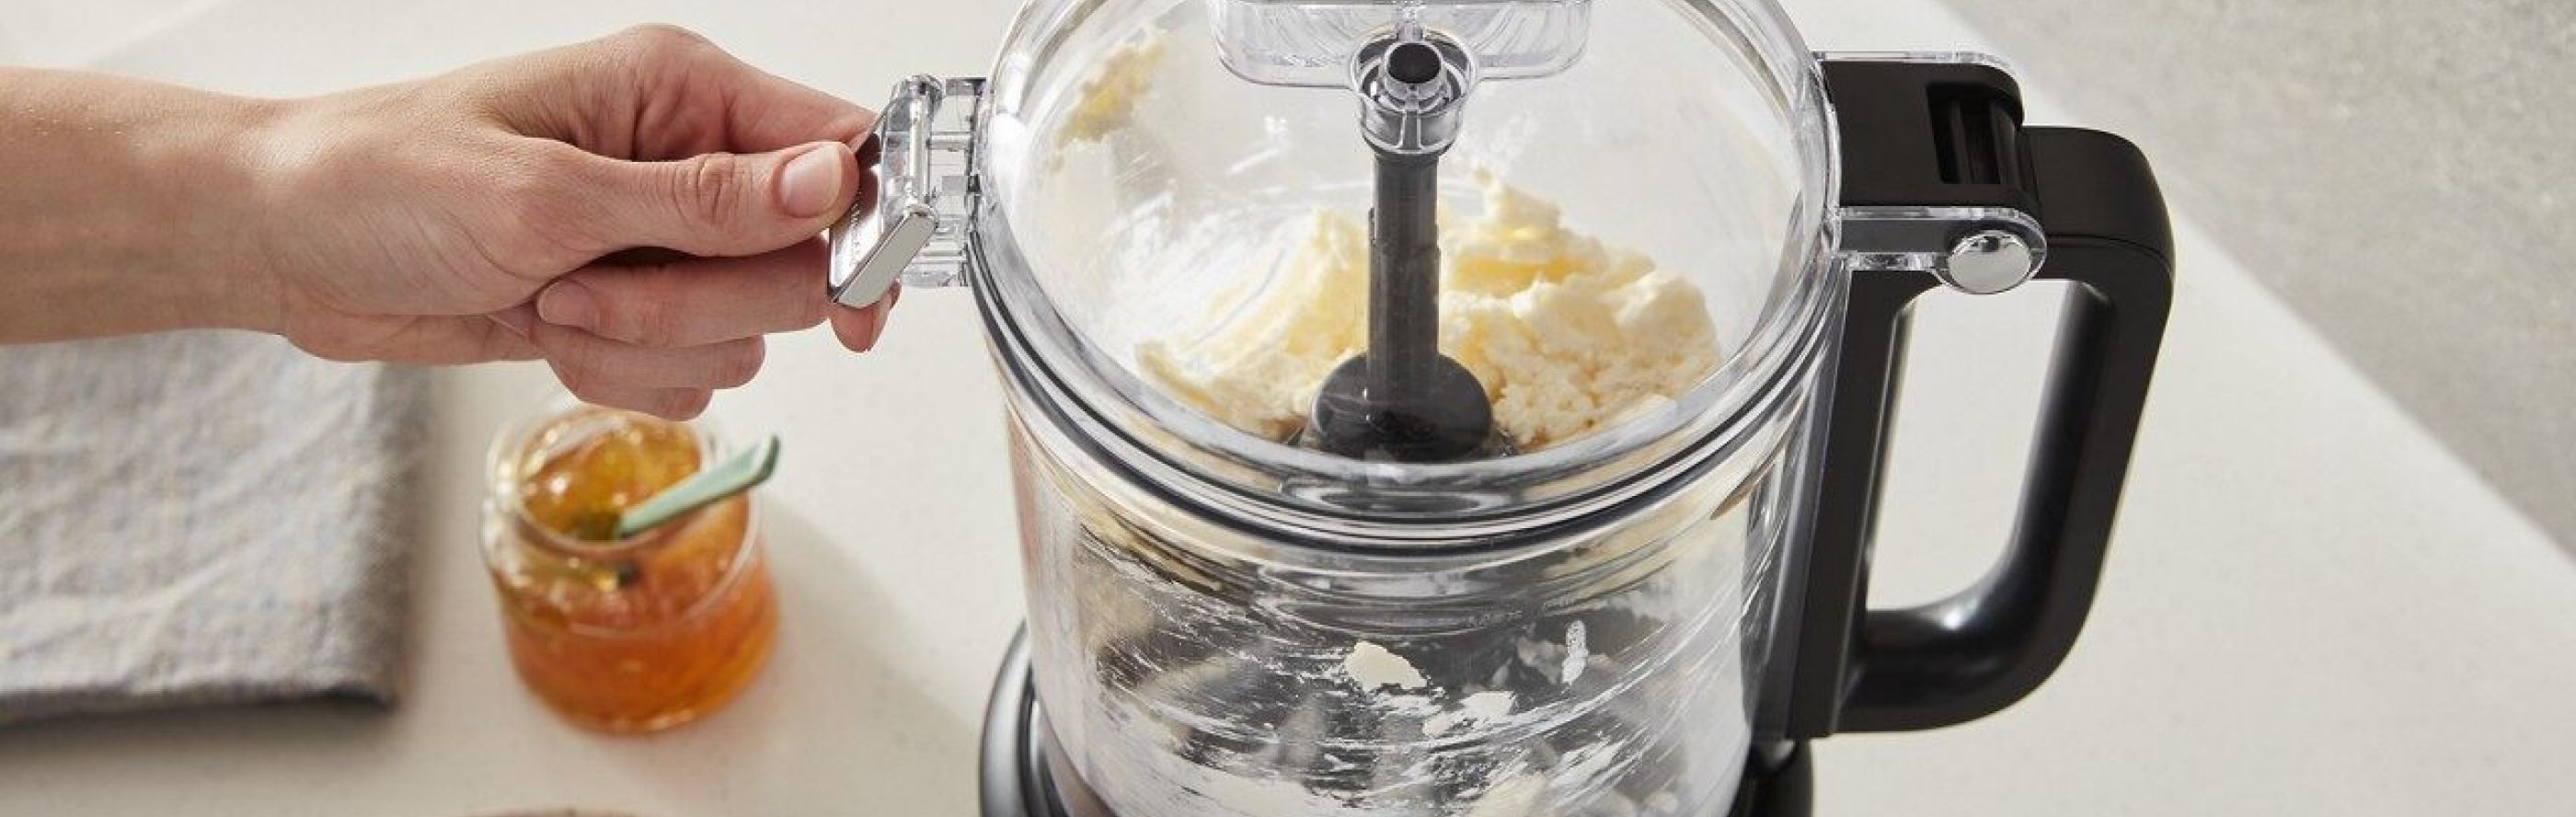 A person opening the lid of a black food processor with butter